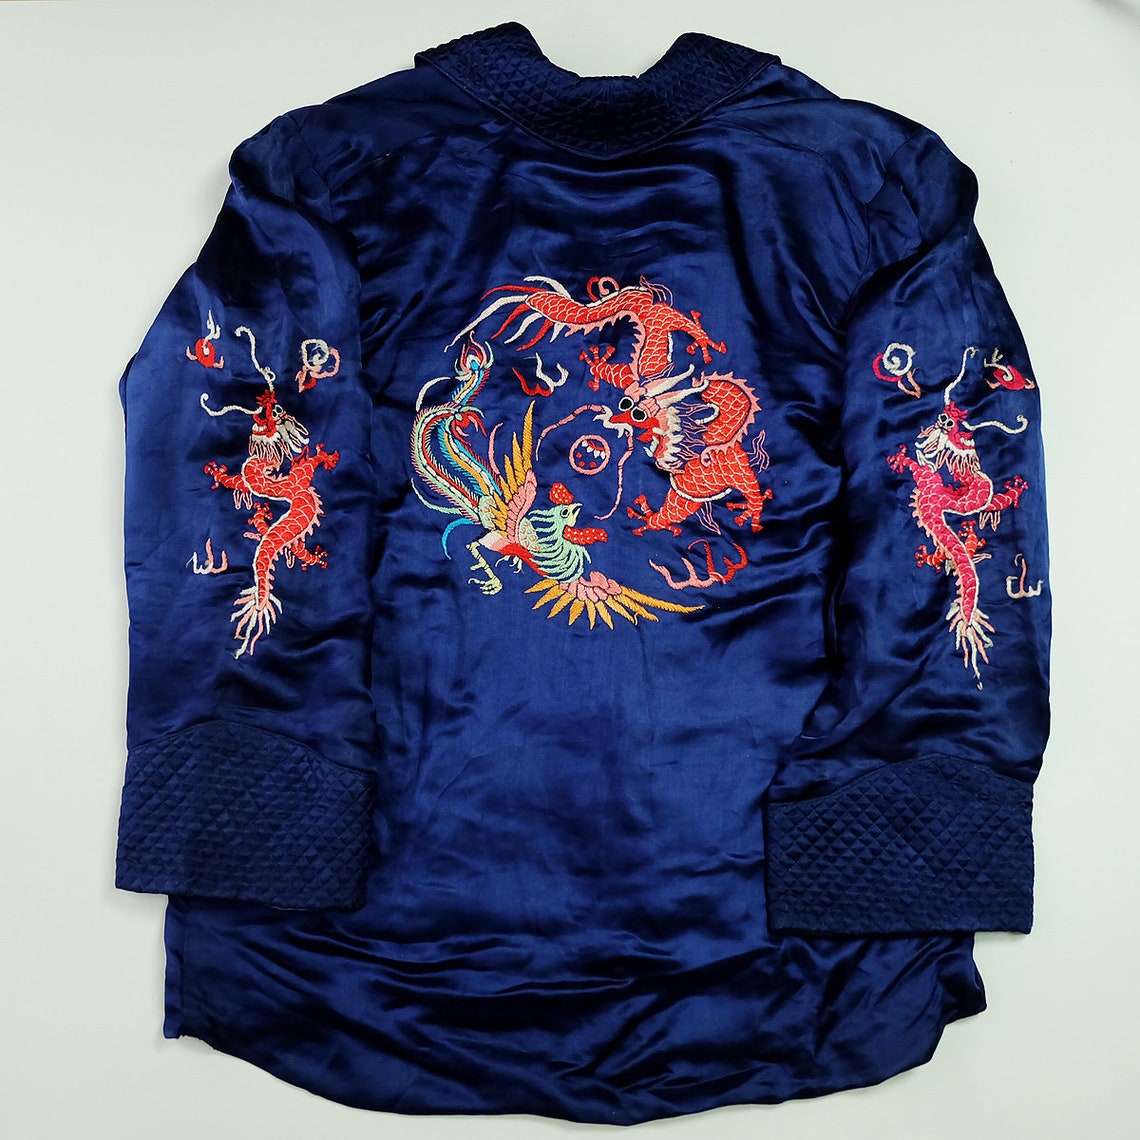 Vintage Collectible China Chinese Oriental Fetish Chic Blue PHOENIX Dragon Ryu Long Embroidered Embroidery Robe Sukajan Souvenir Jacket ( Size : M )